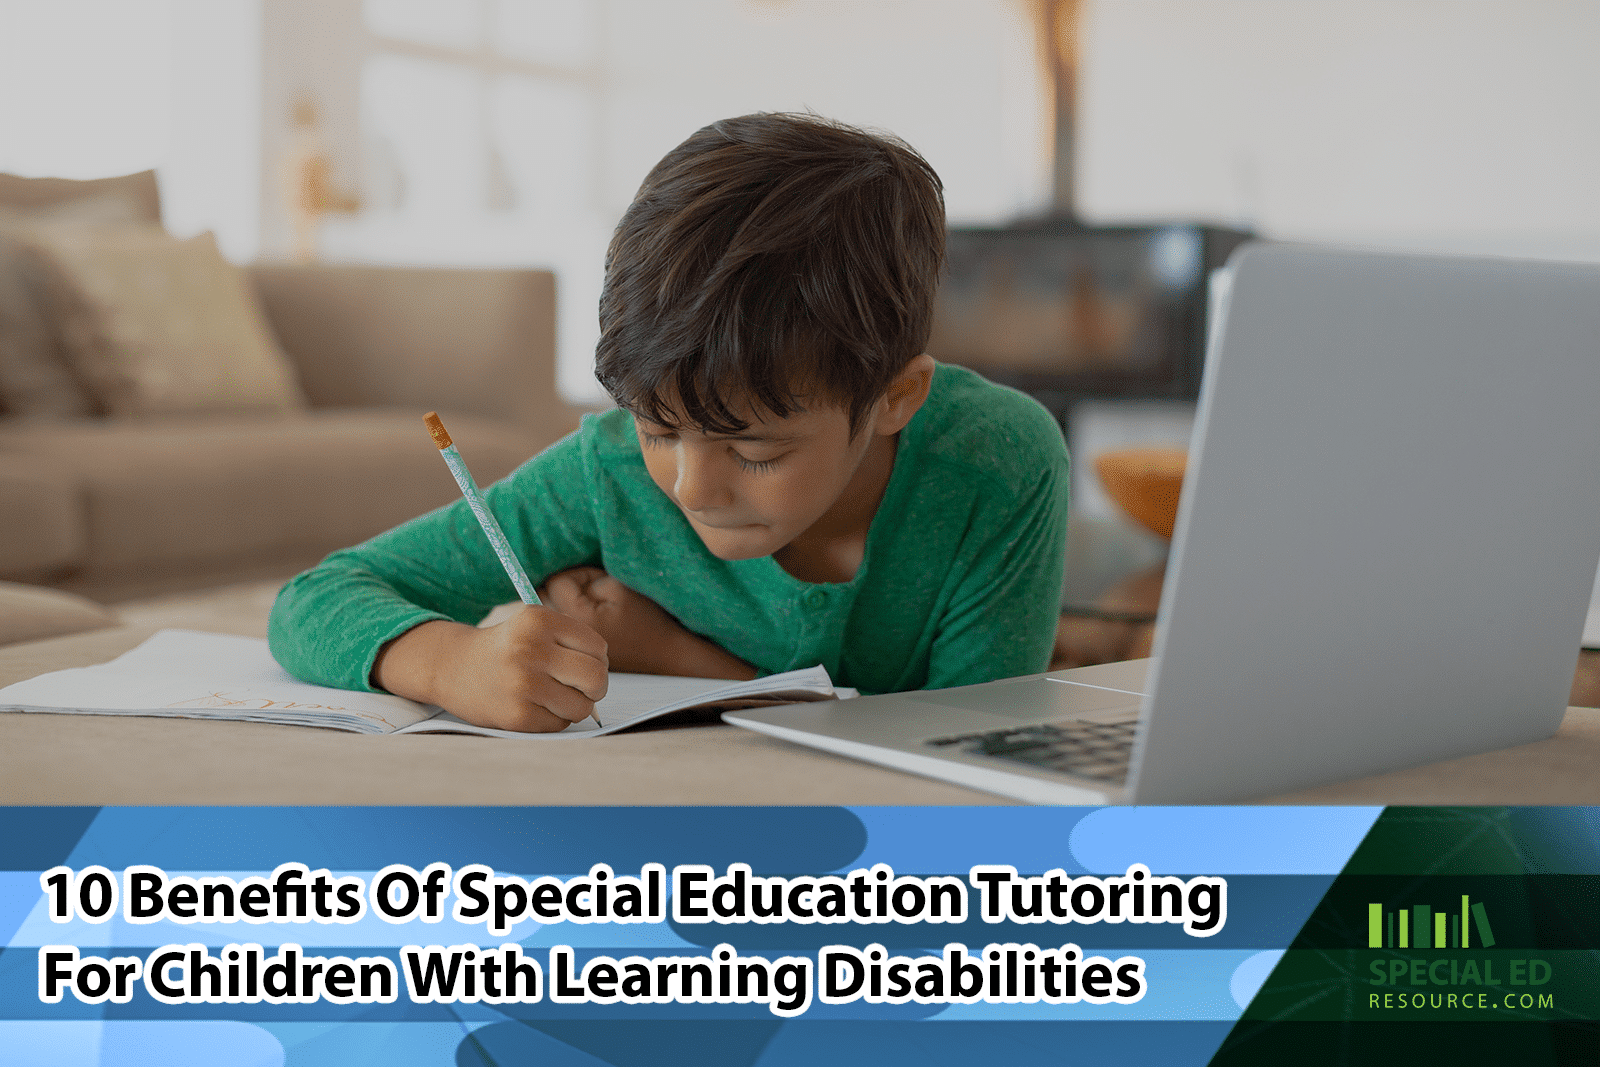 Ten Benefits Of Special Education Tutoring For Children With Learning Disabilities